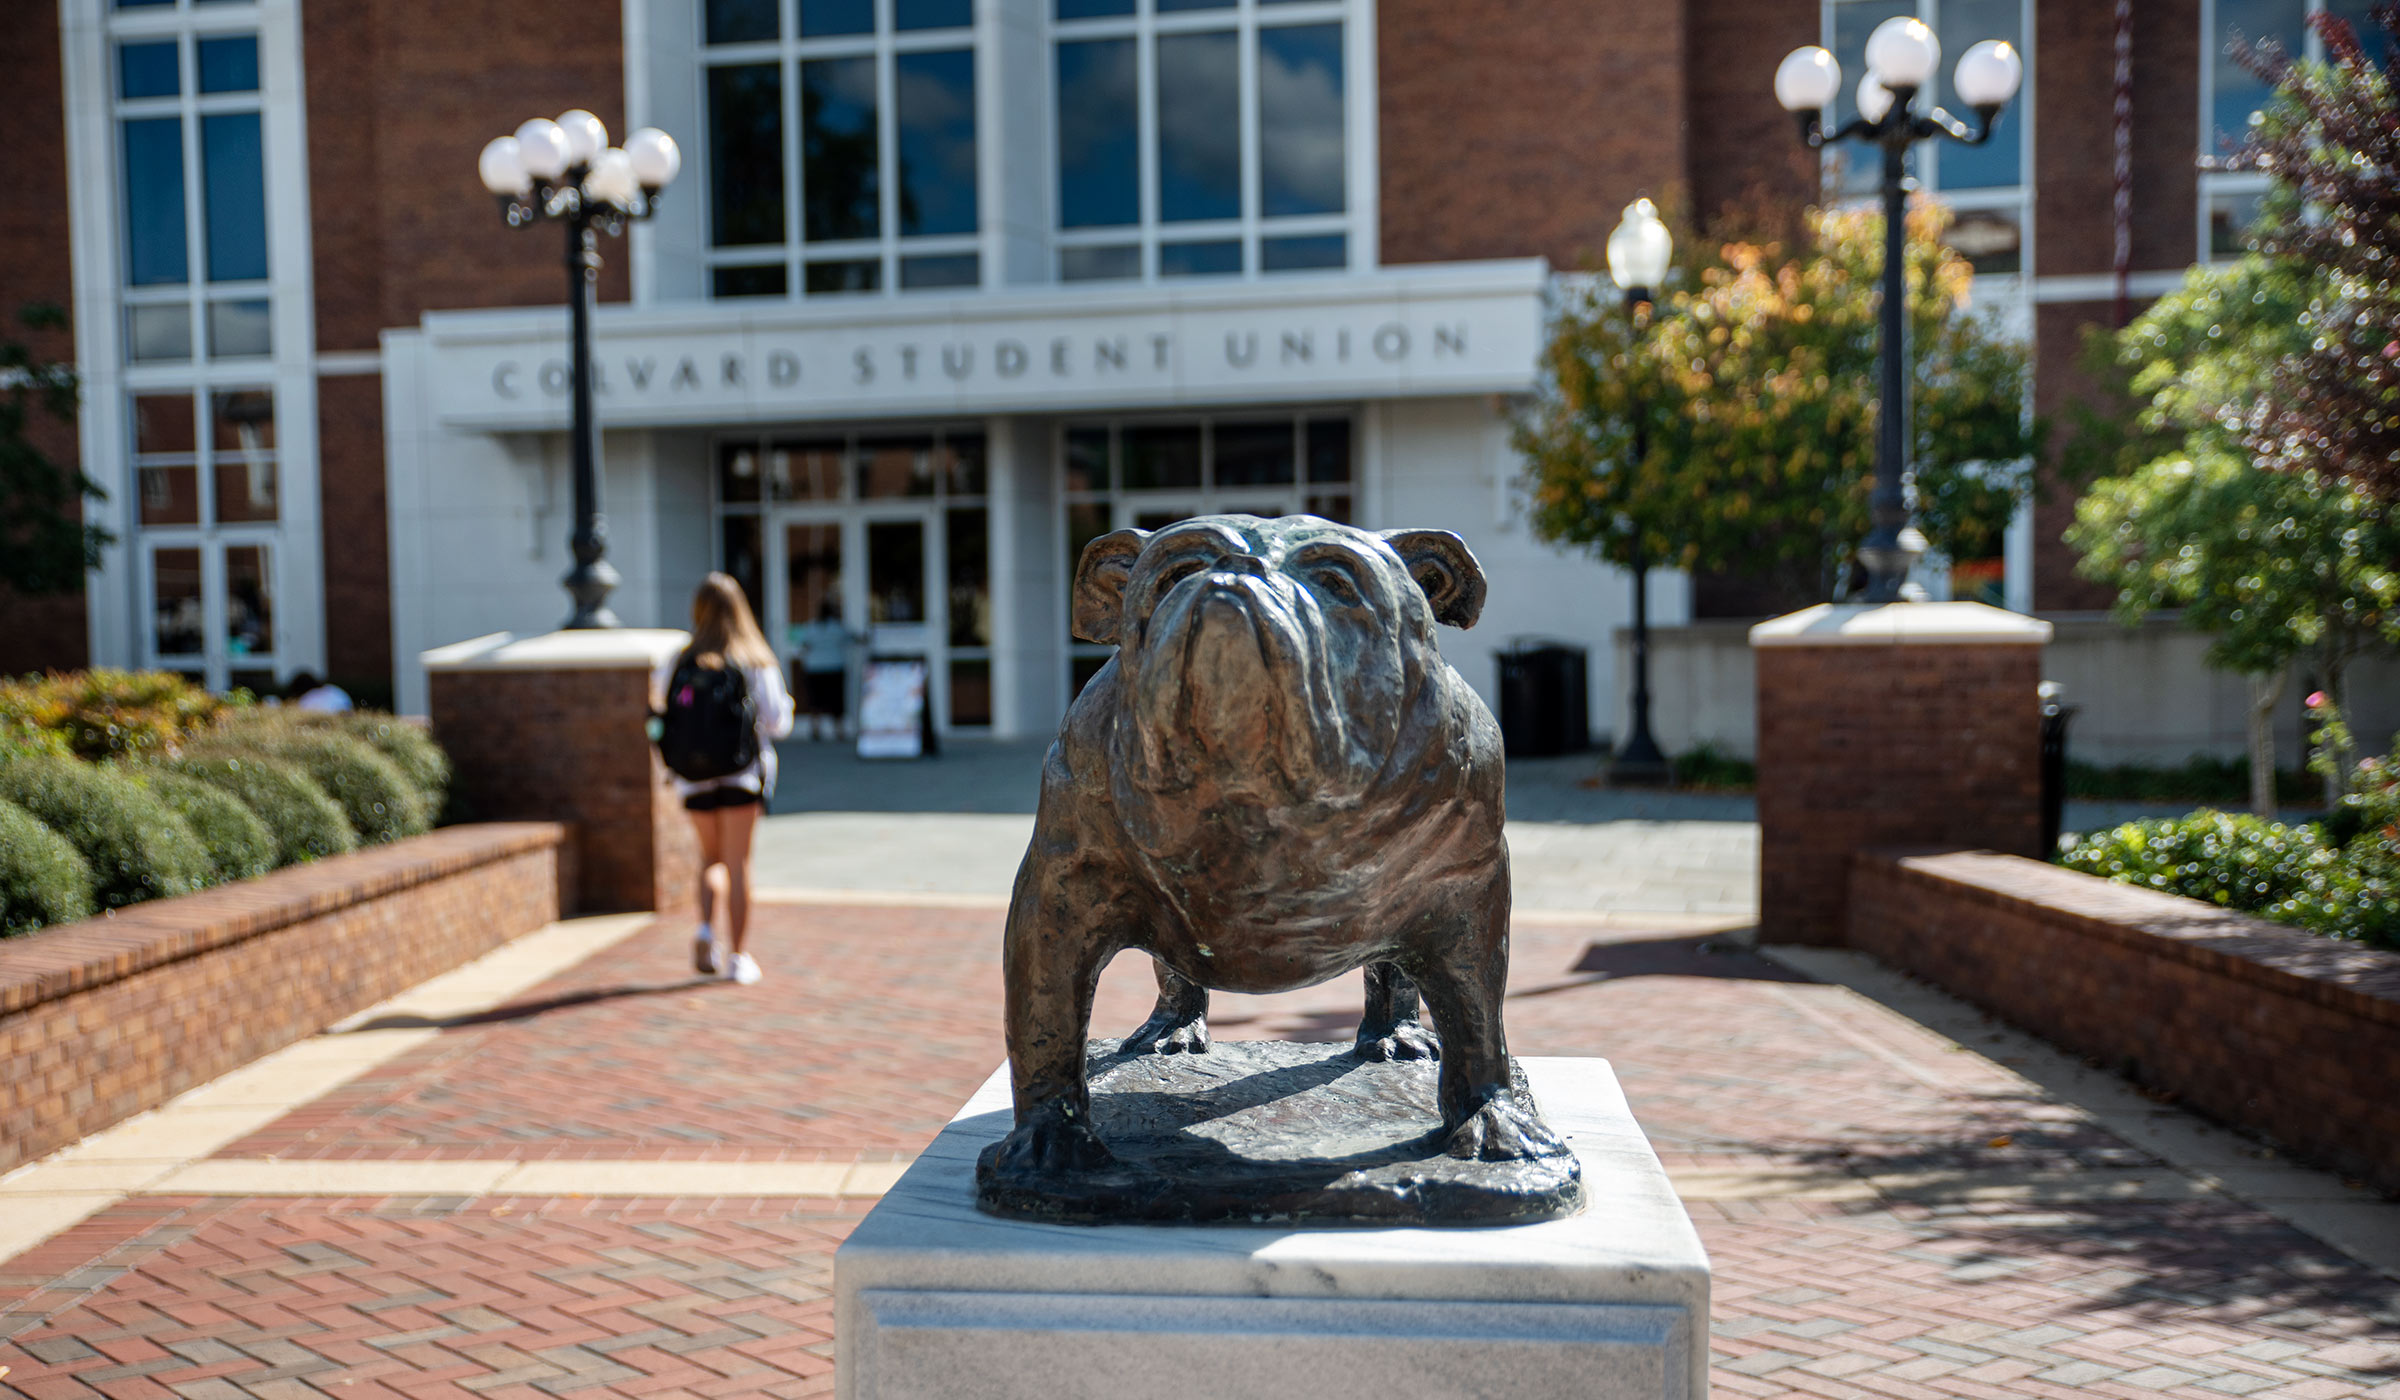 Bulldog statue in front of Student Union with student walking past in background.